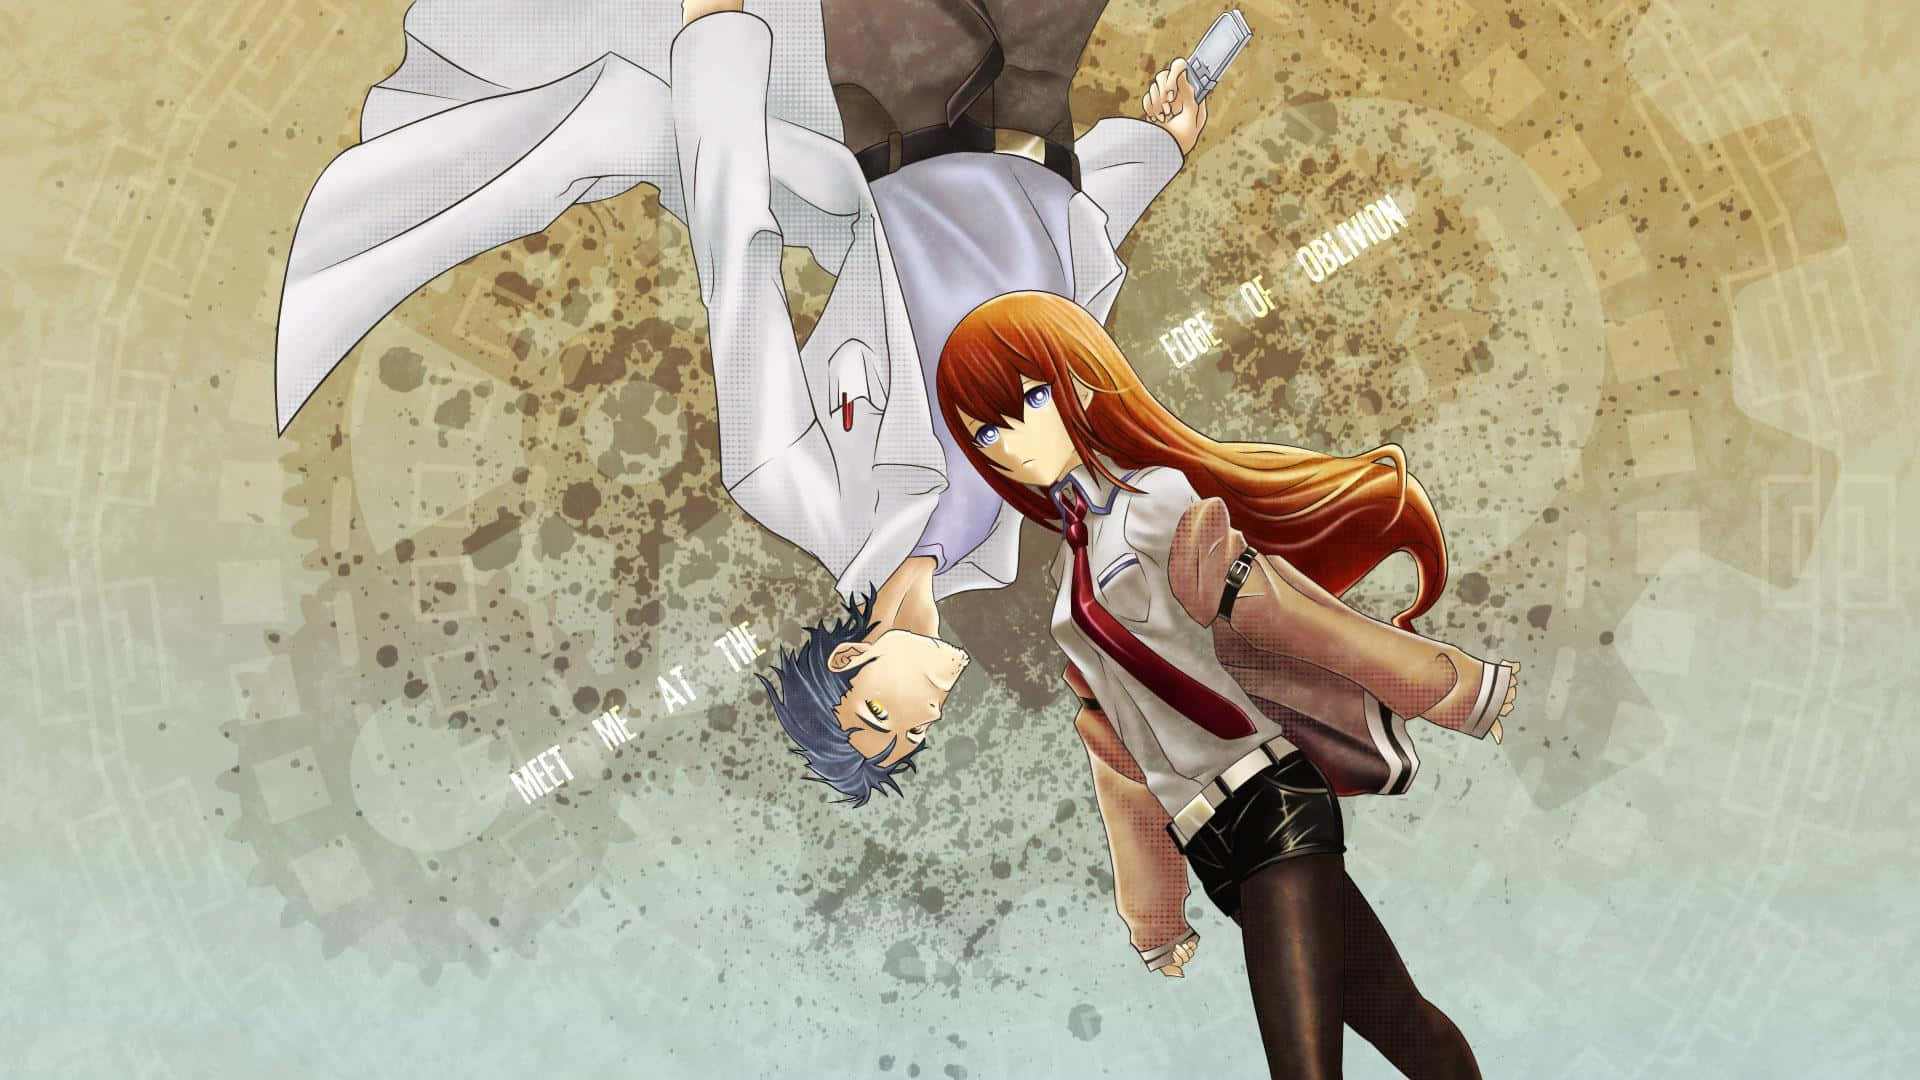 Steins Gate - Animated Fantasy World with Enigmatic Characters